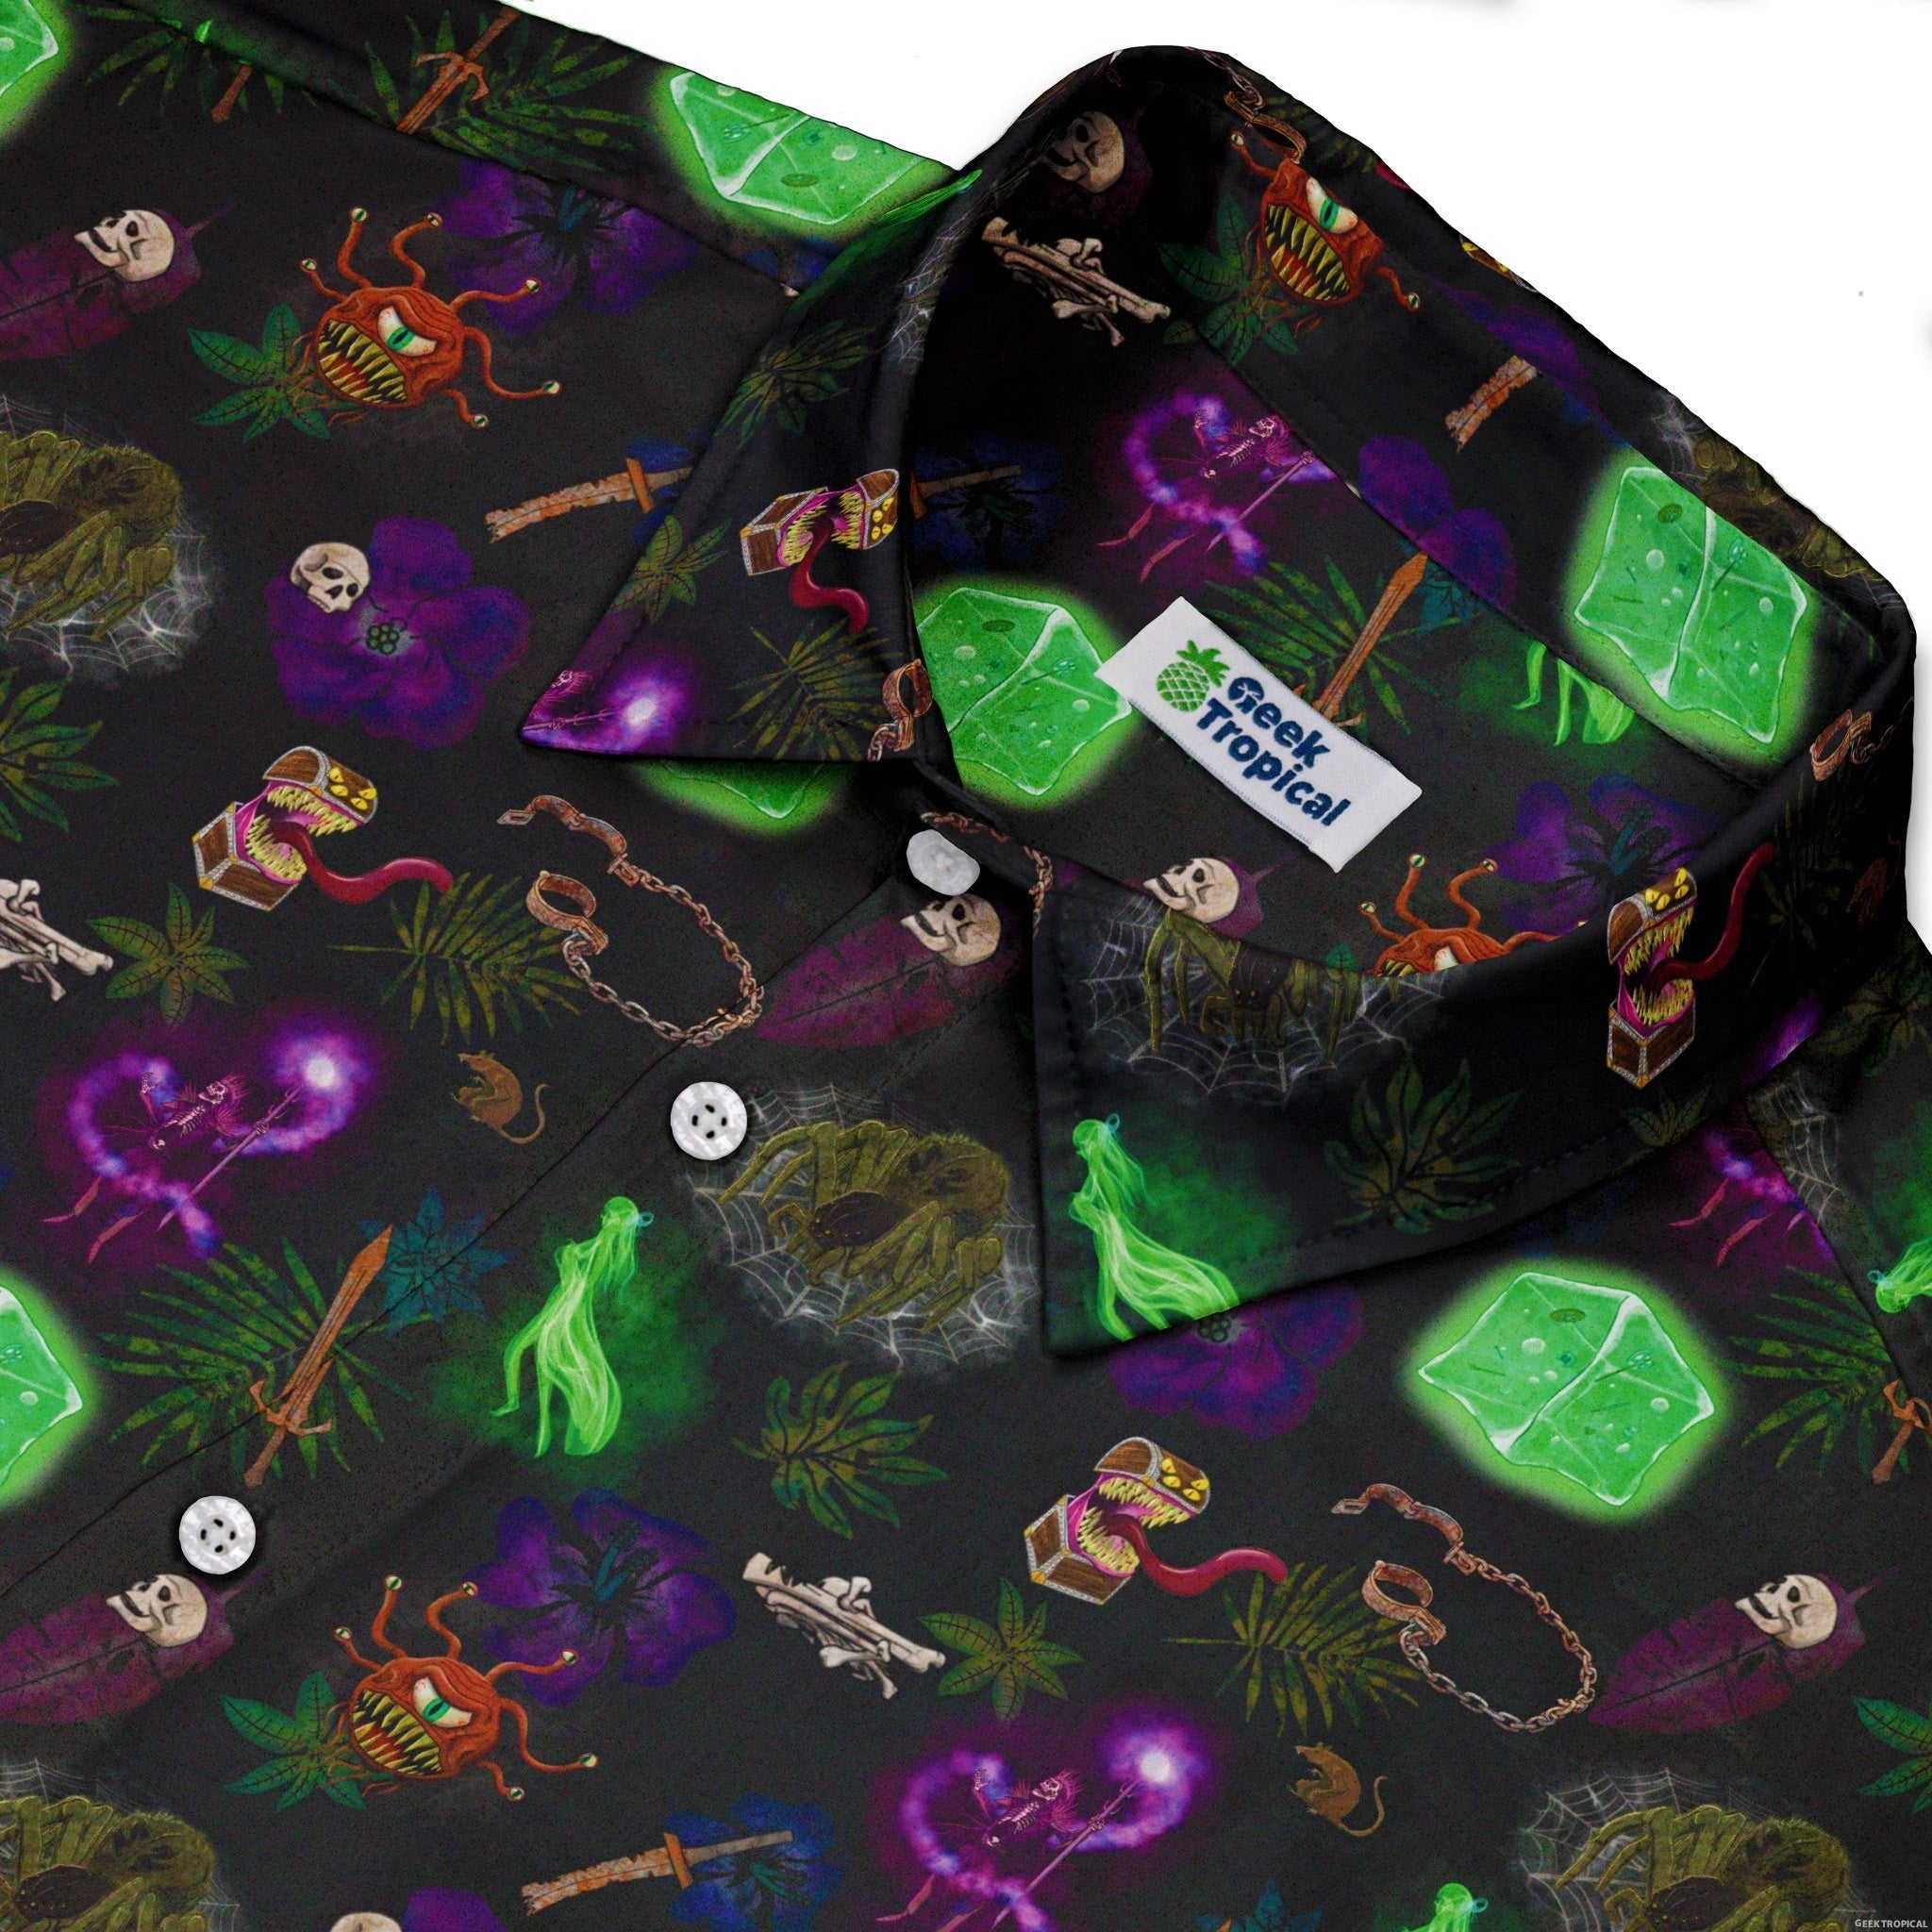 Dnd Dungeon Monsters Button Up Shirt - adult sizing - Designs by Nathan - dnd & rpg print